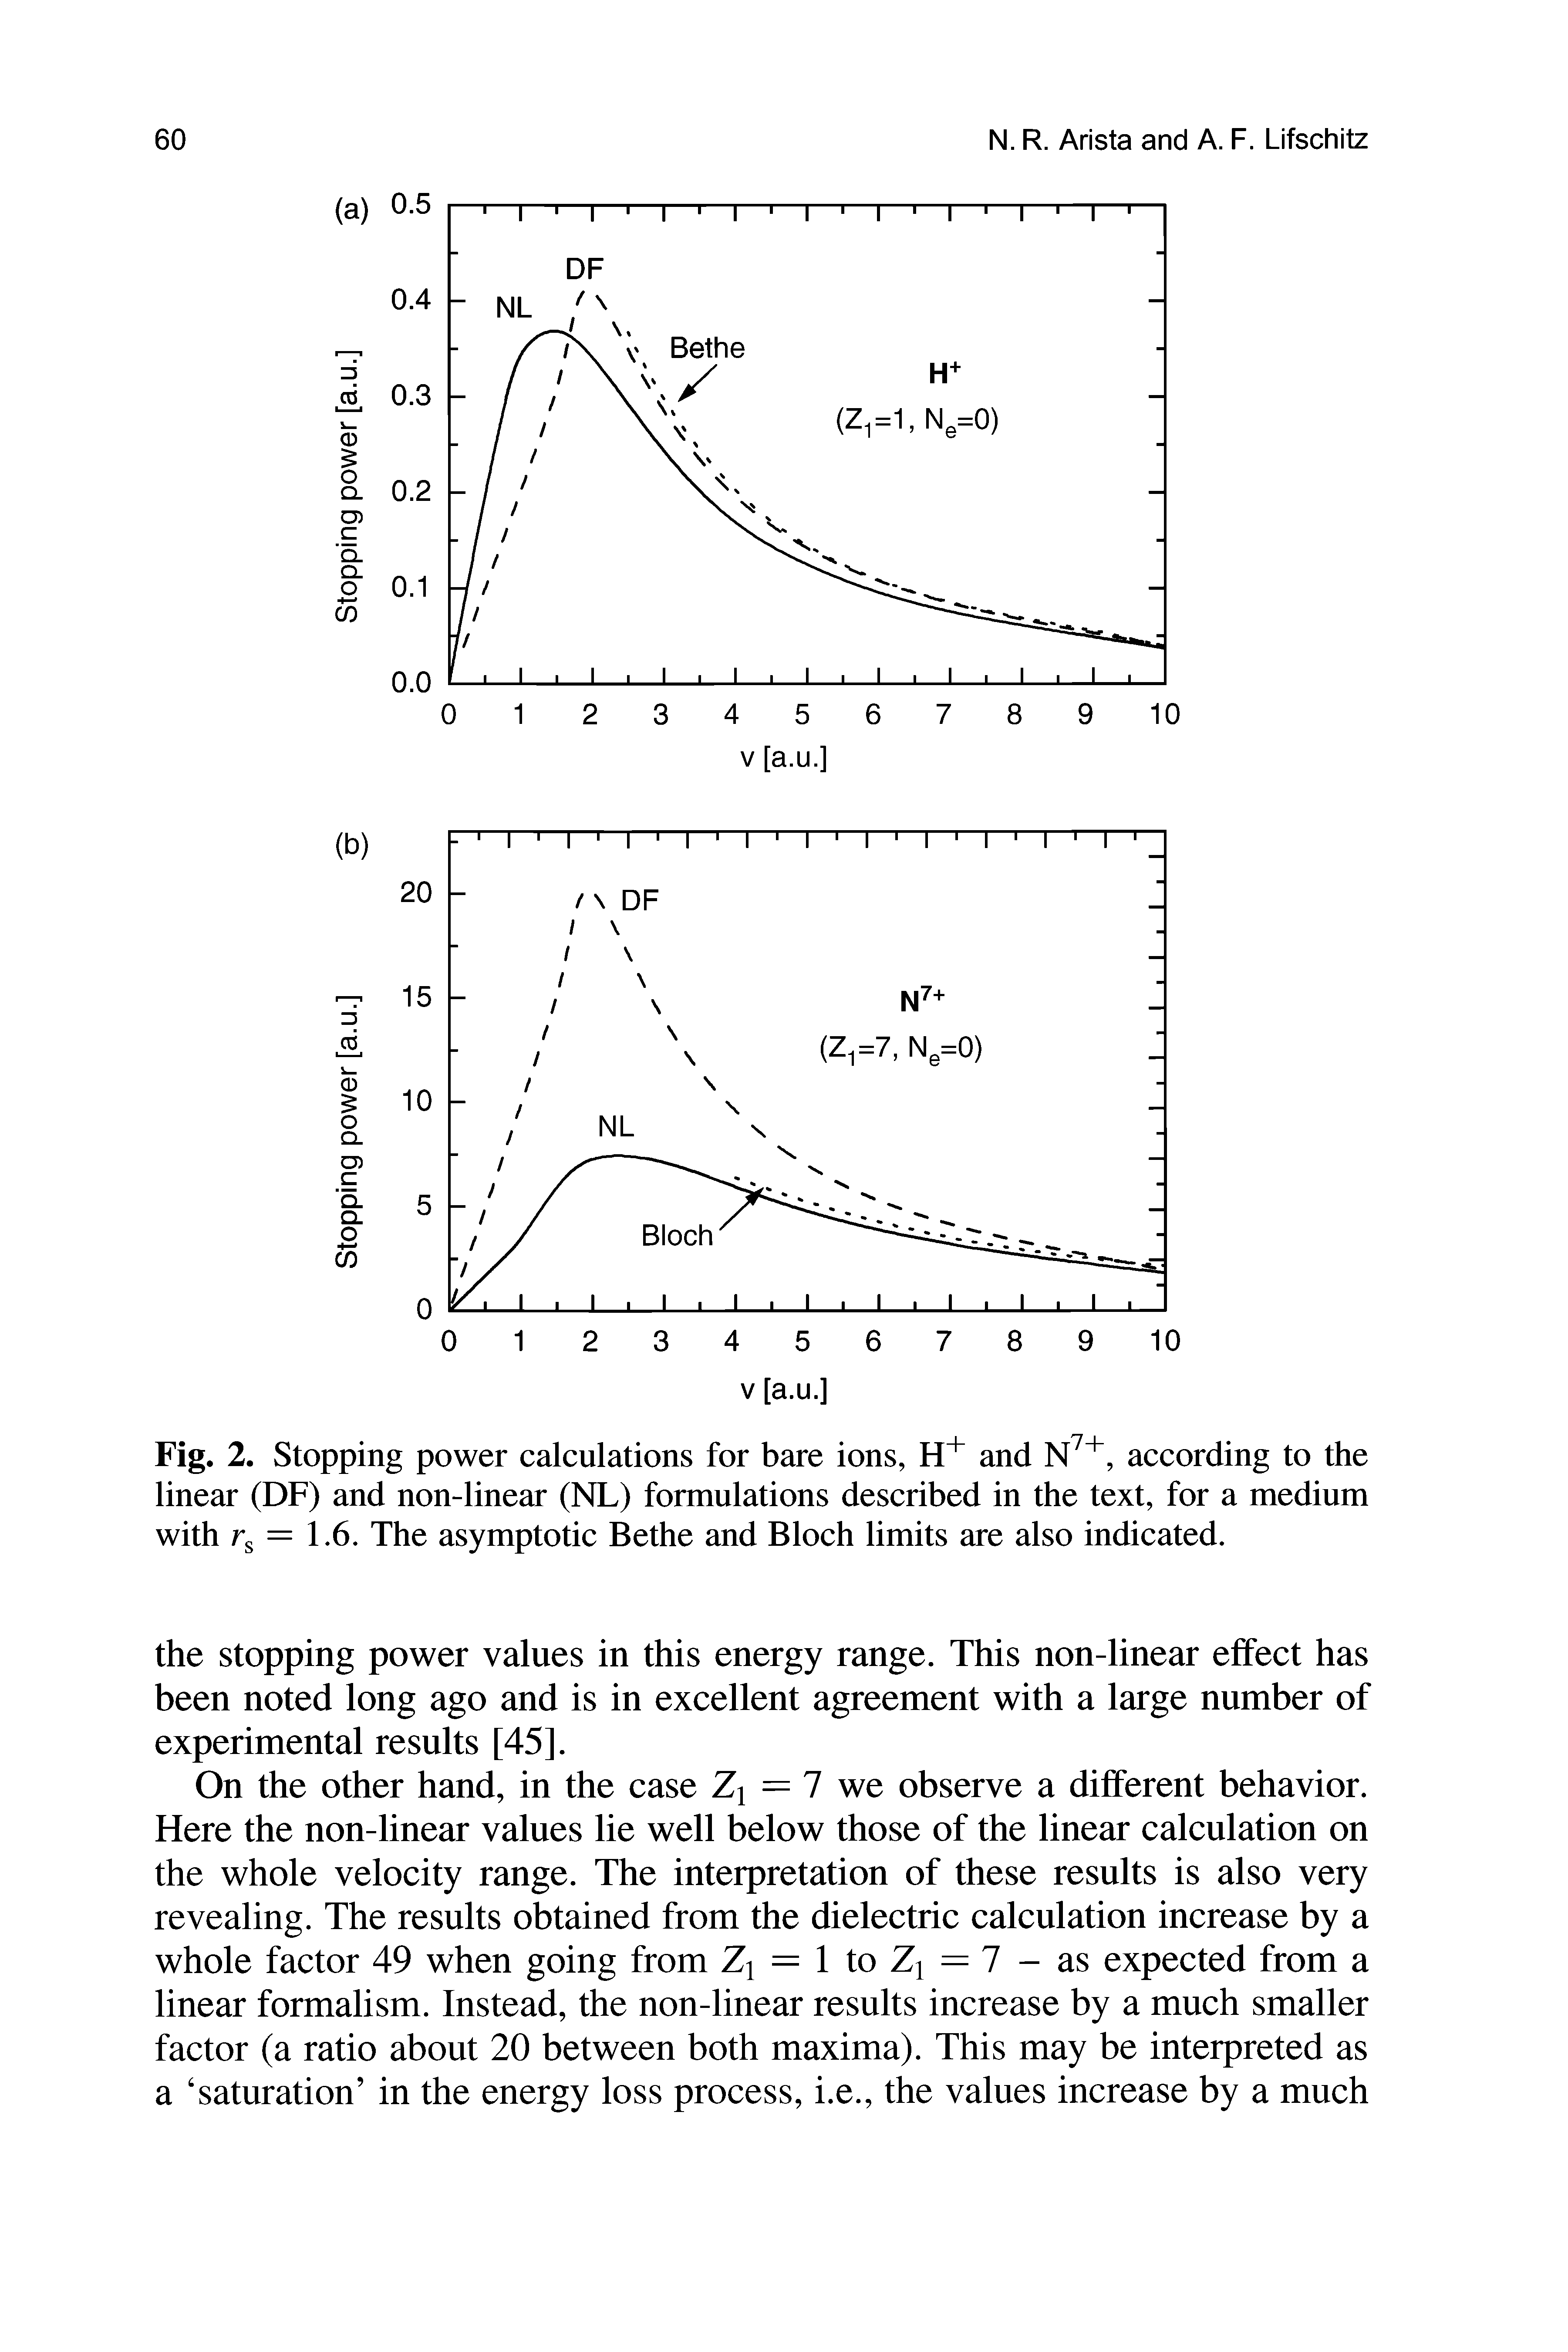 Fig. 2. Stopping power calculations for bare ions, H and according to the linear (DF) and non-linear (NL) formulations described in the text, for a medium with Tg = 1.6. The asymptotic Bethe and Bloch limits are also indicated.